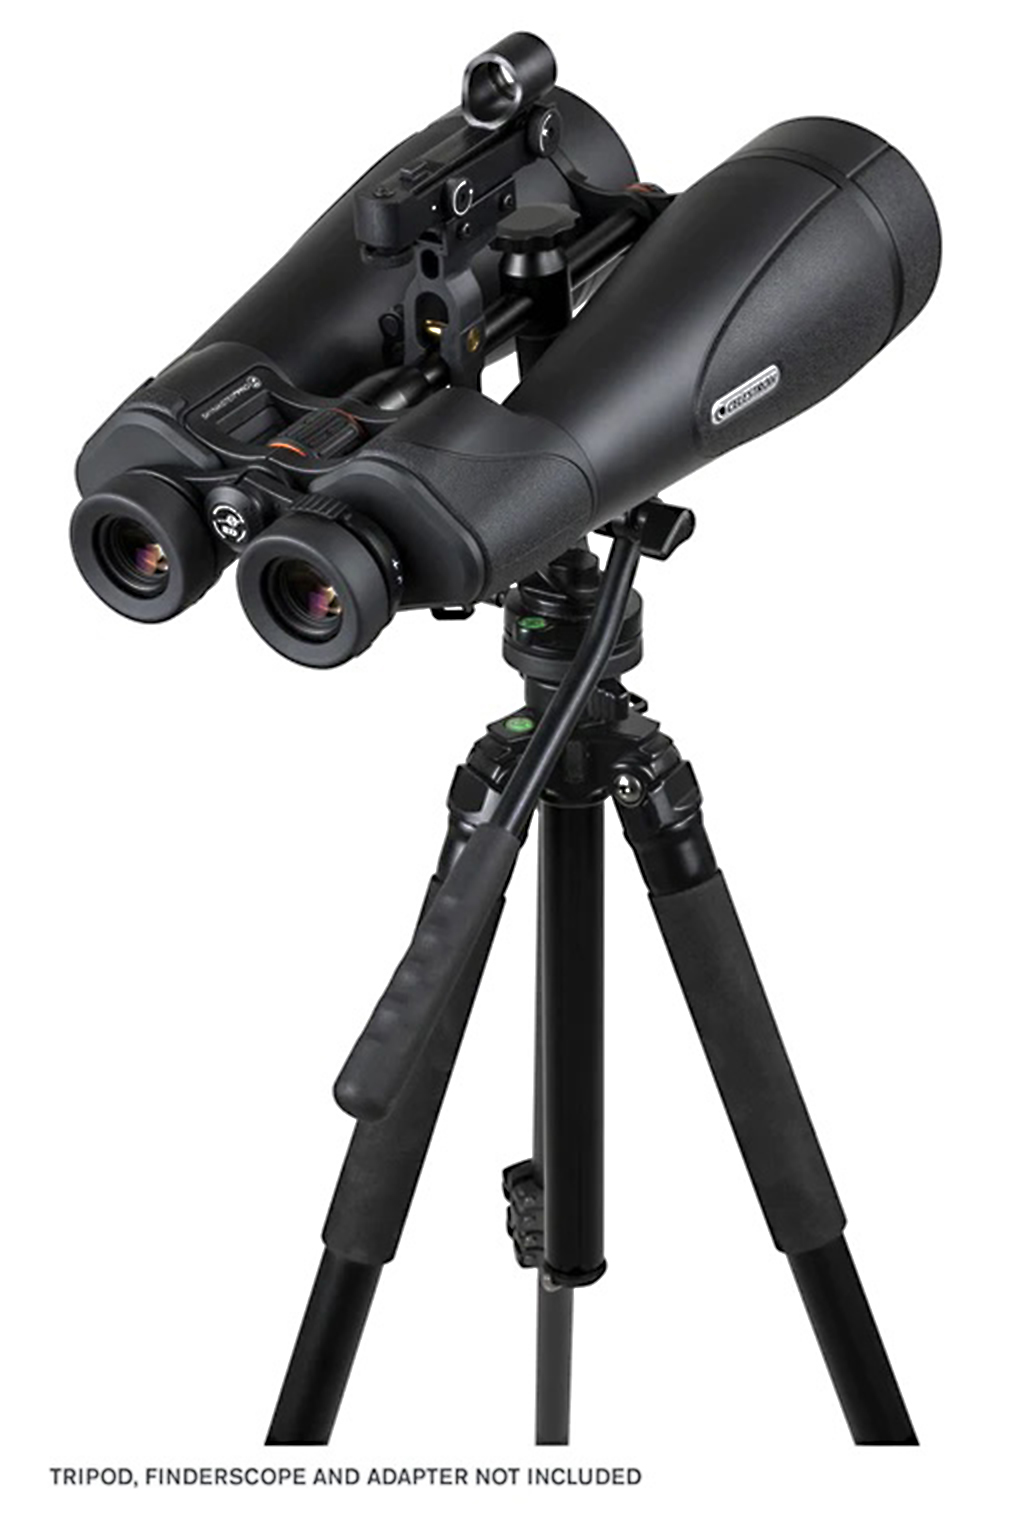 The SkyMaster Pro ED 20x80mm Porro binoculars comes with a tripod adapter and a neck strap to provide support while observing.